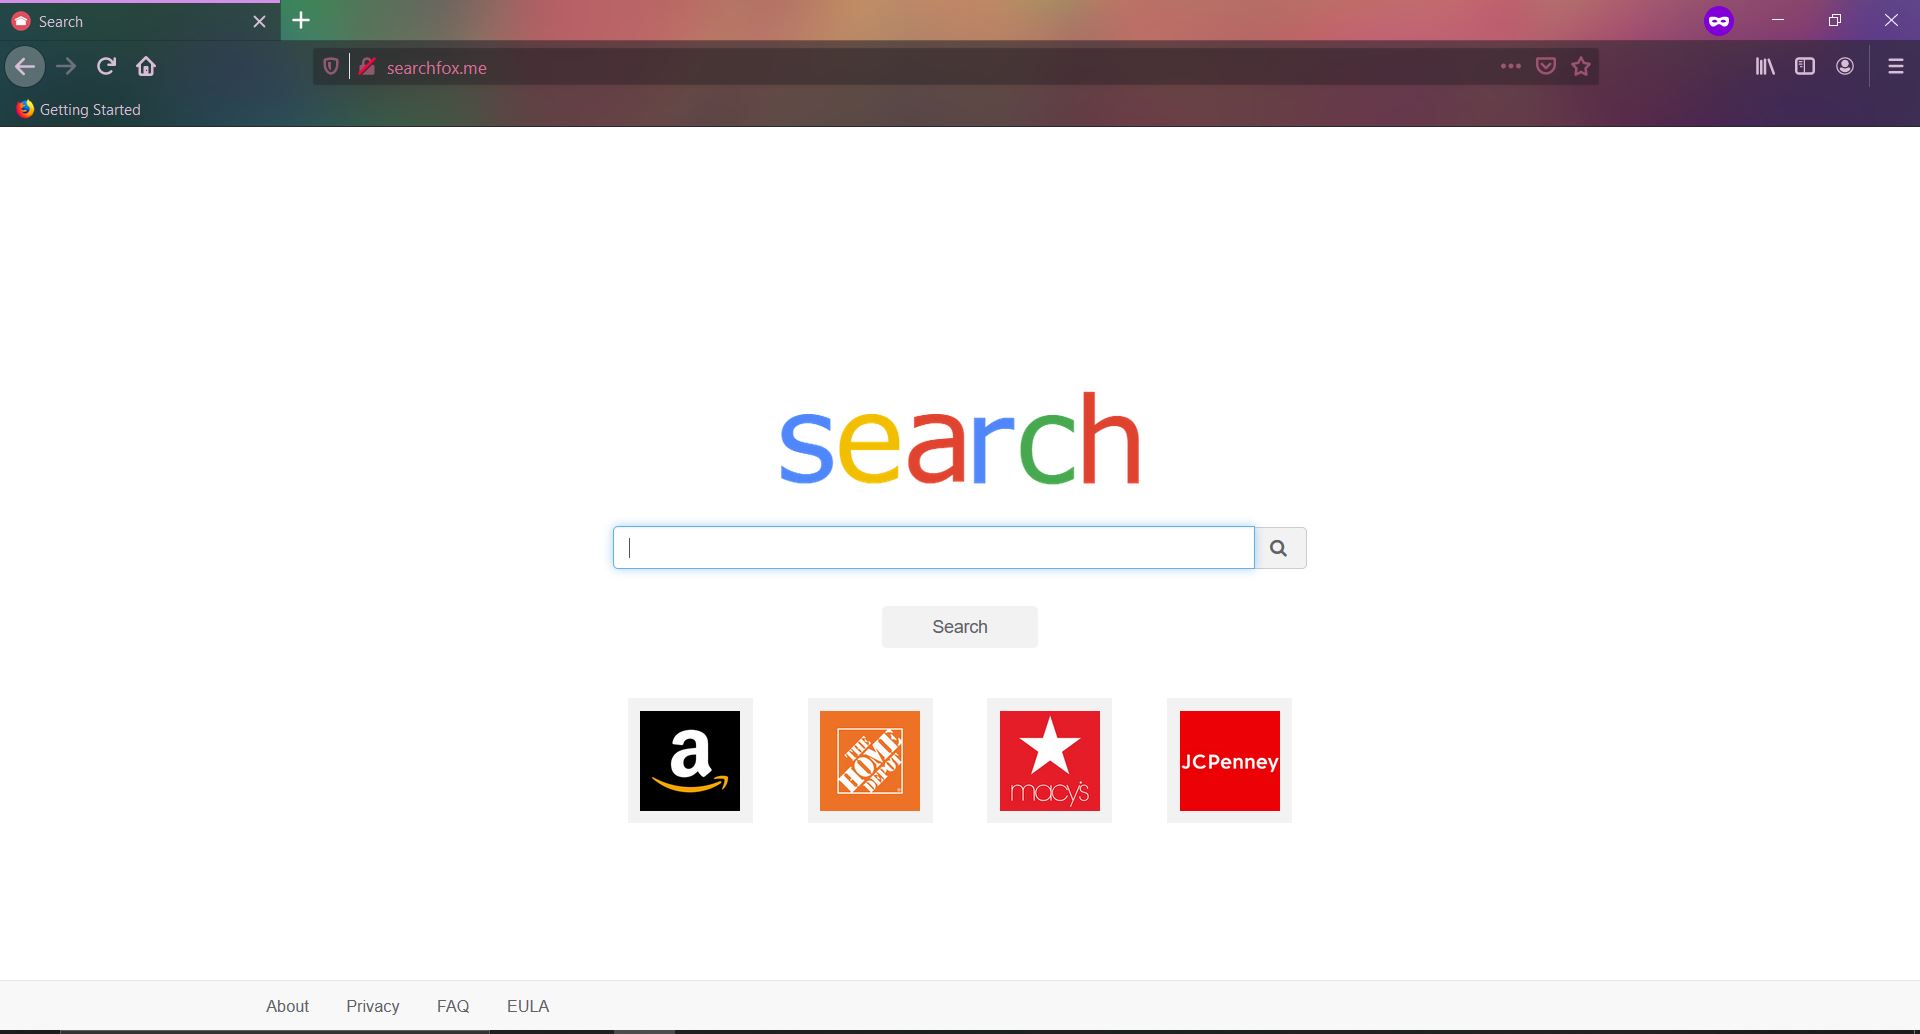 searchfox.be redirect mac virus removal guide